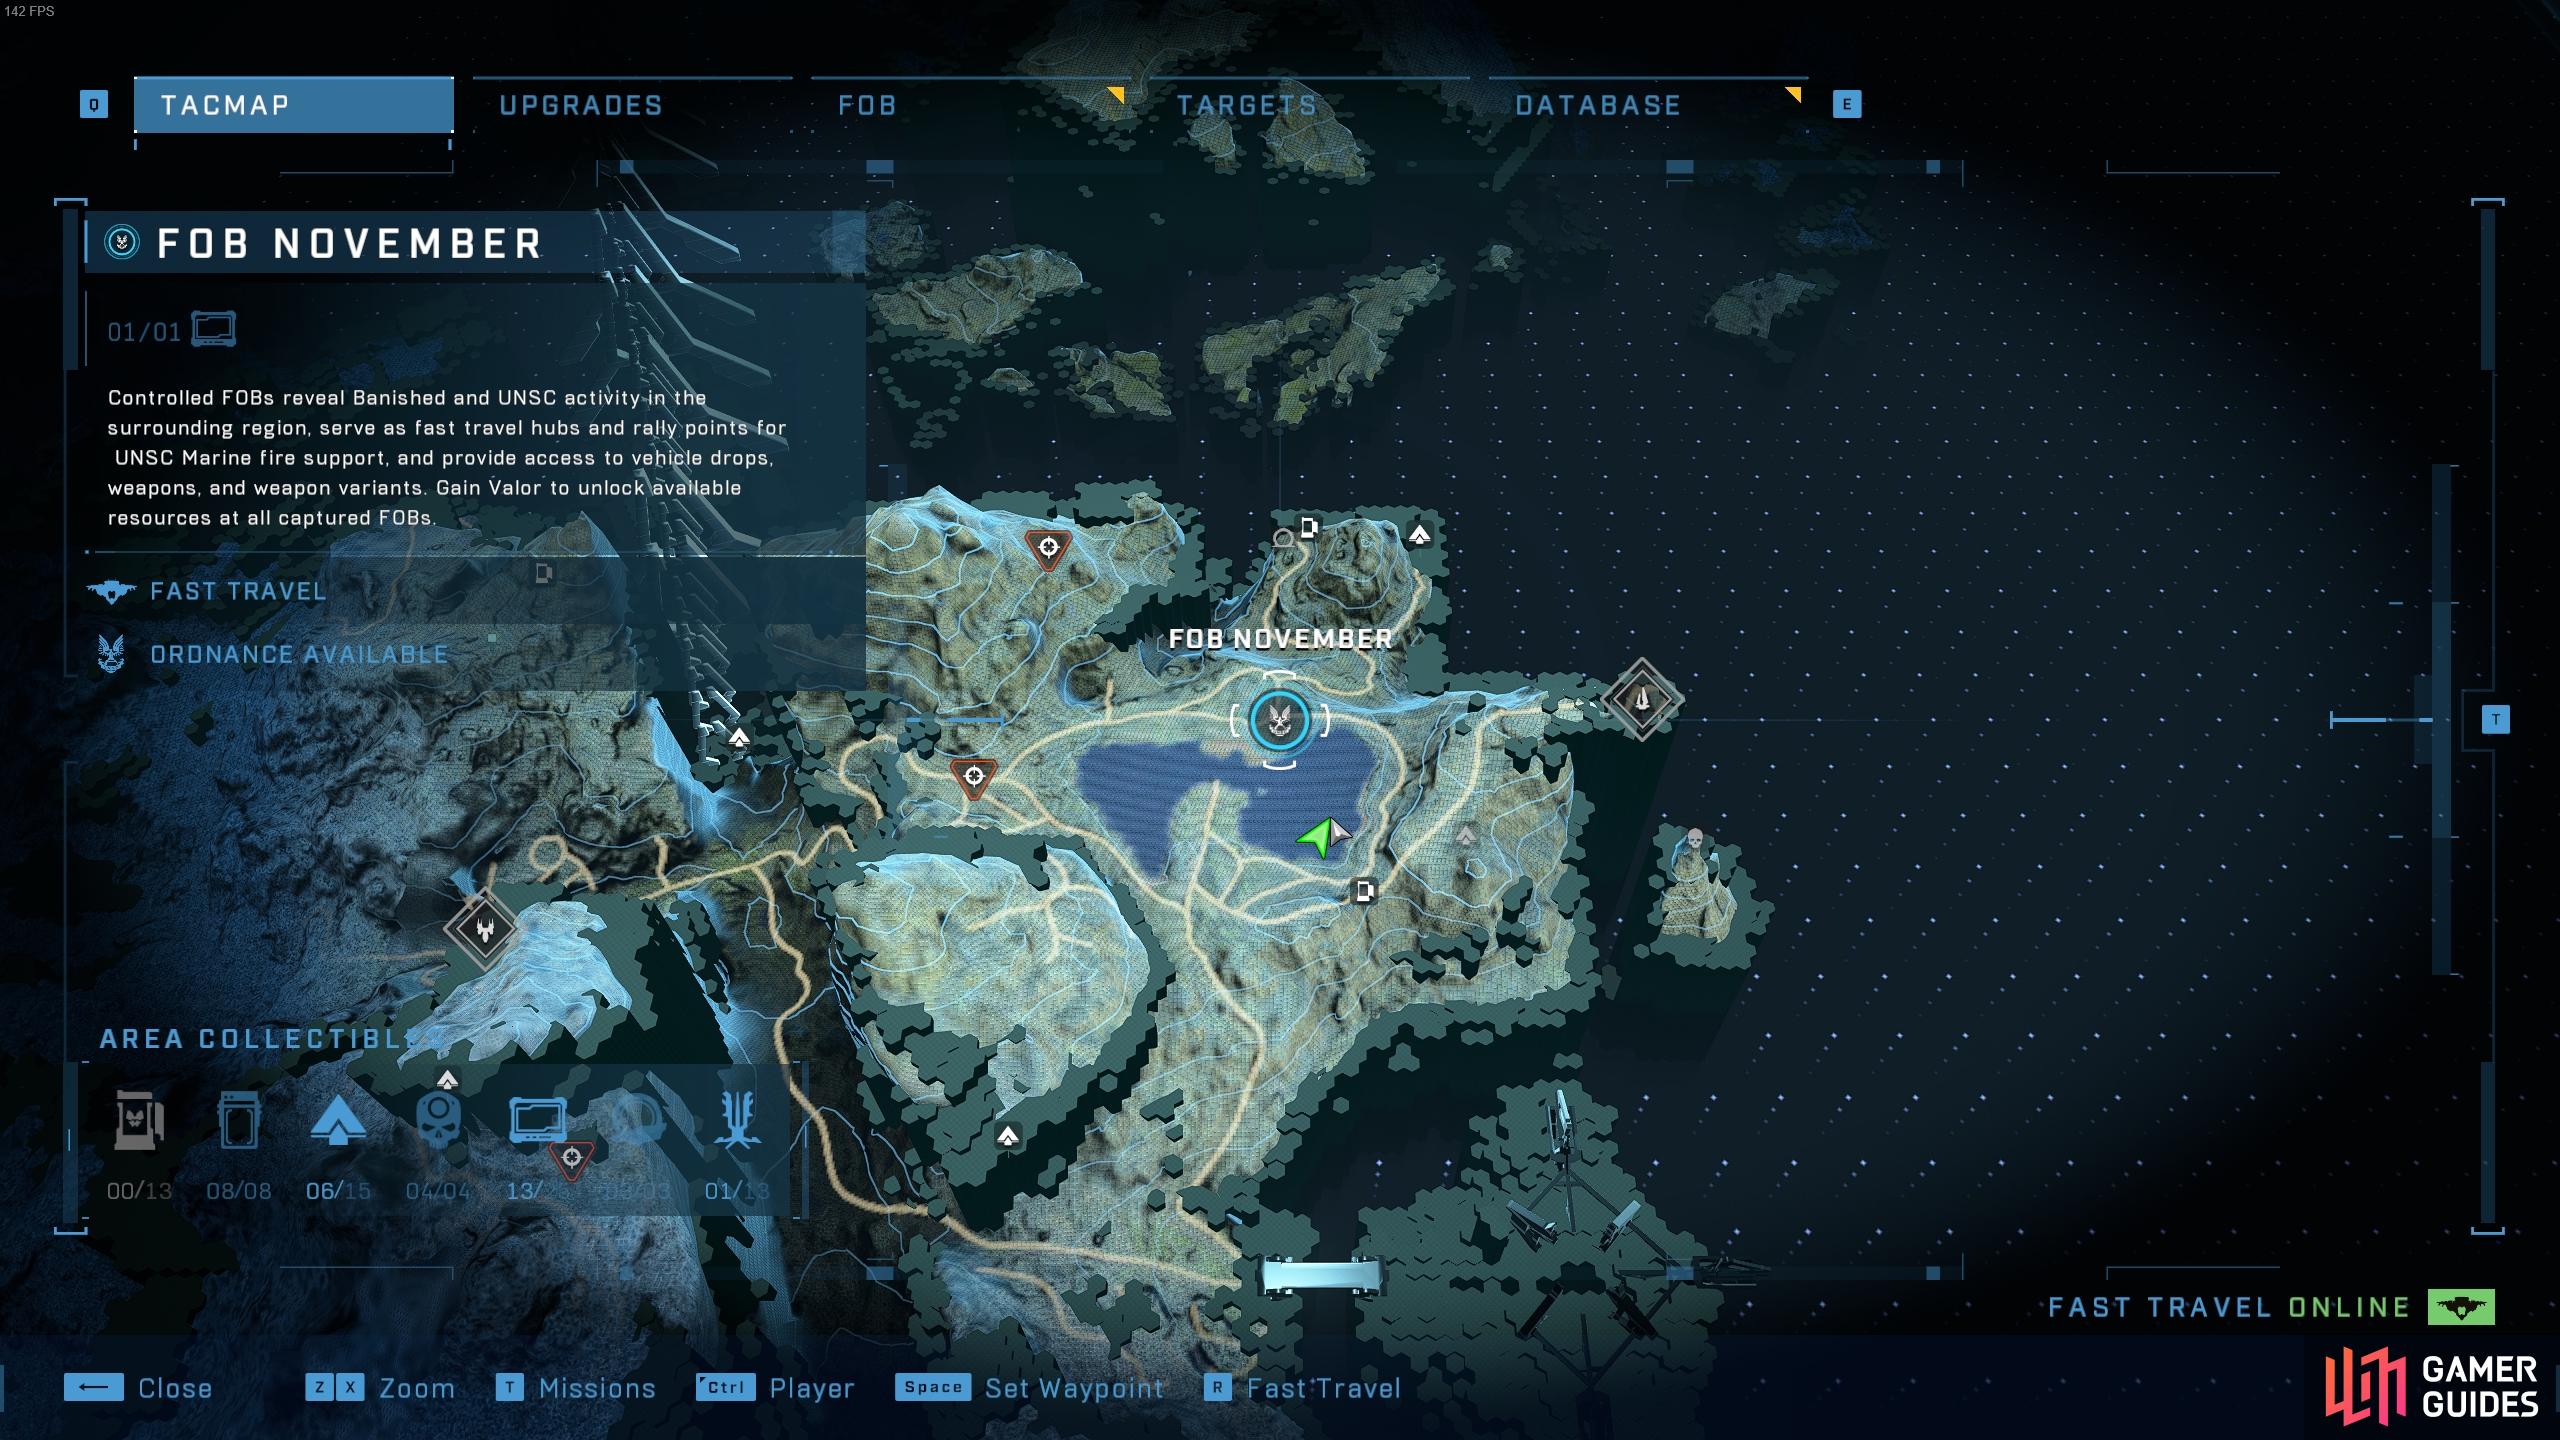 The location of the Encroachment Spartan audio log, in the southeastern part of the map.